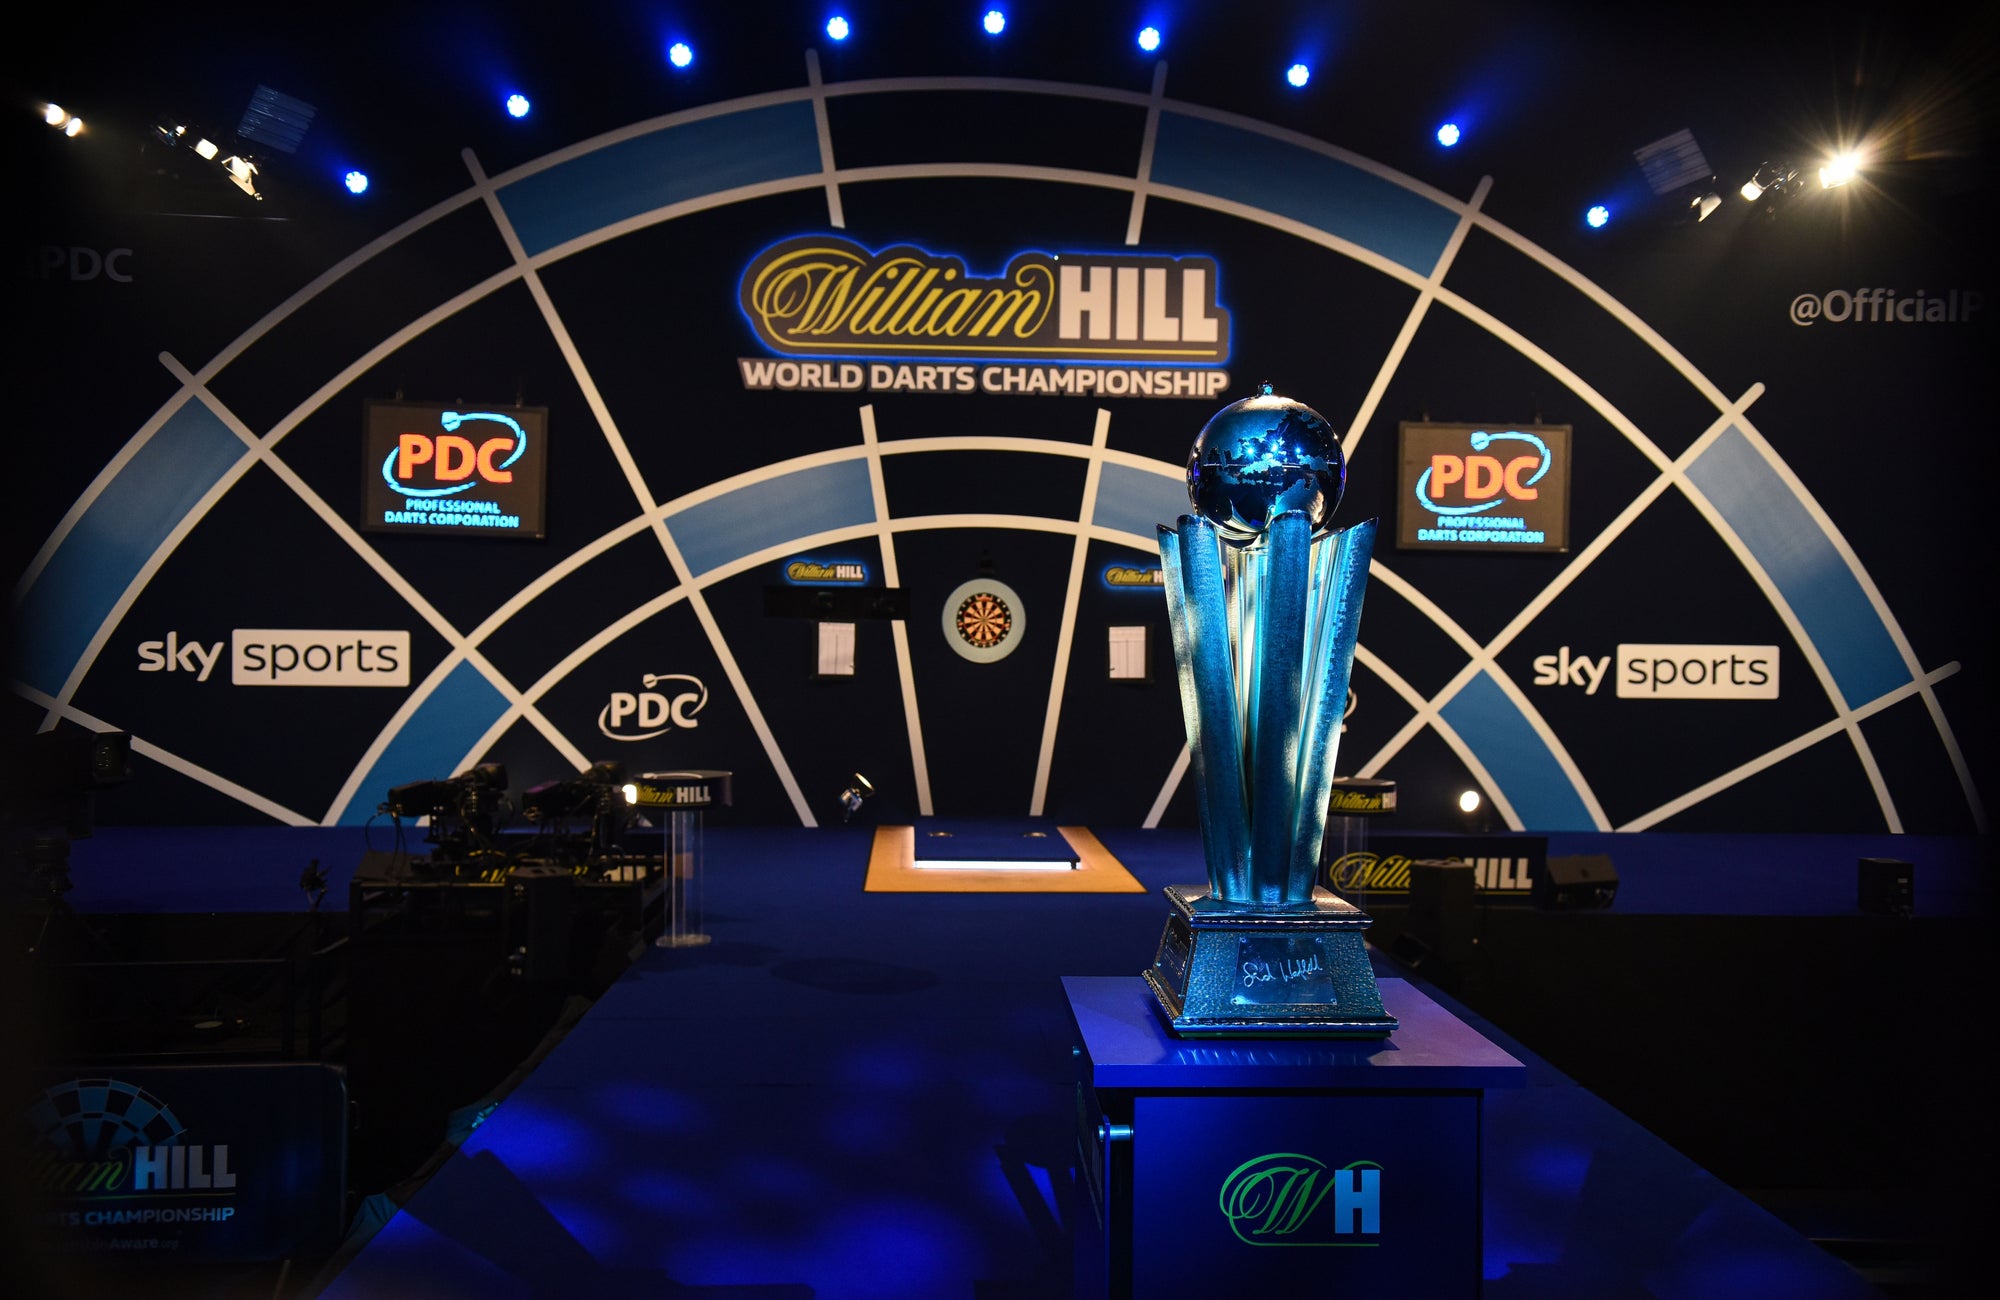 Selco offers £100k jackpot for nine-dart double at World Championship